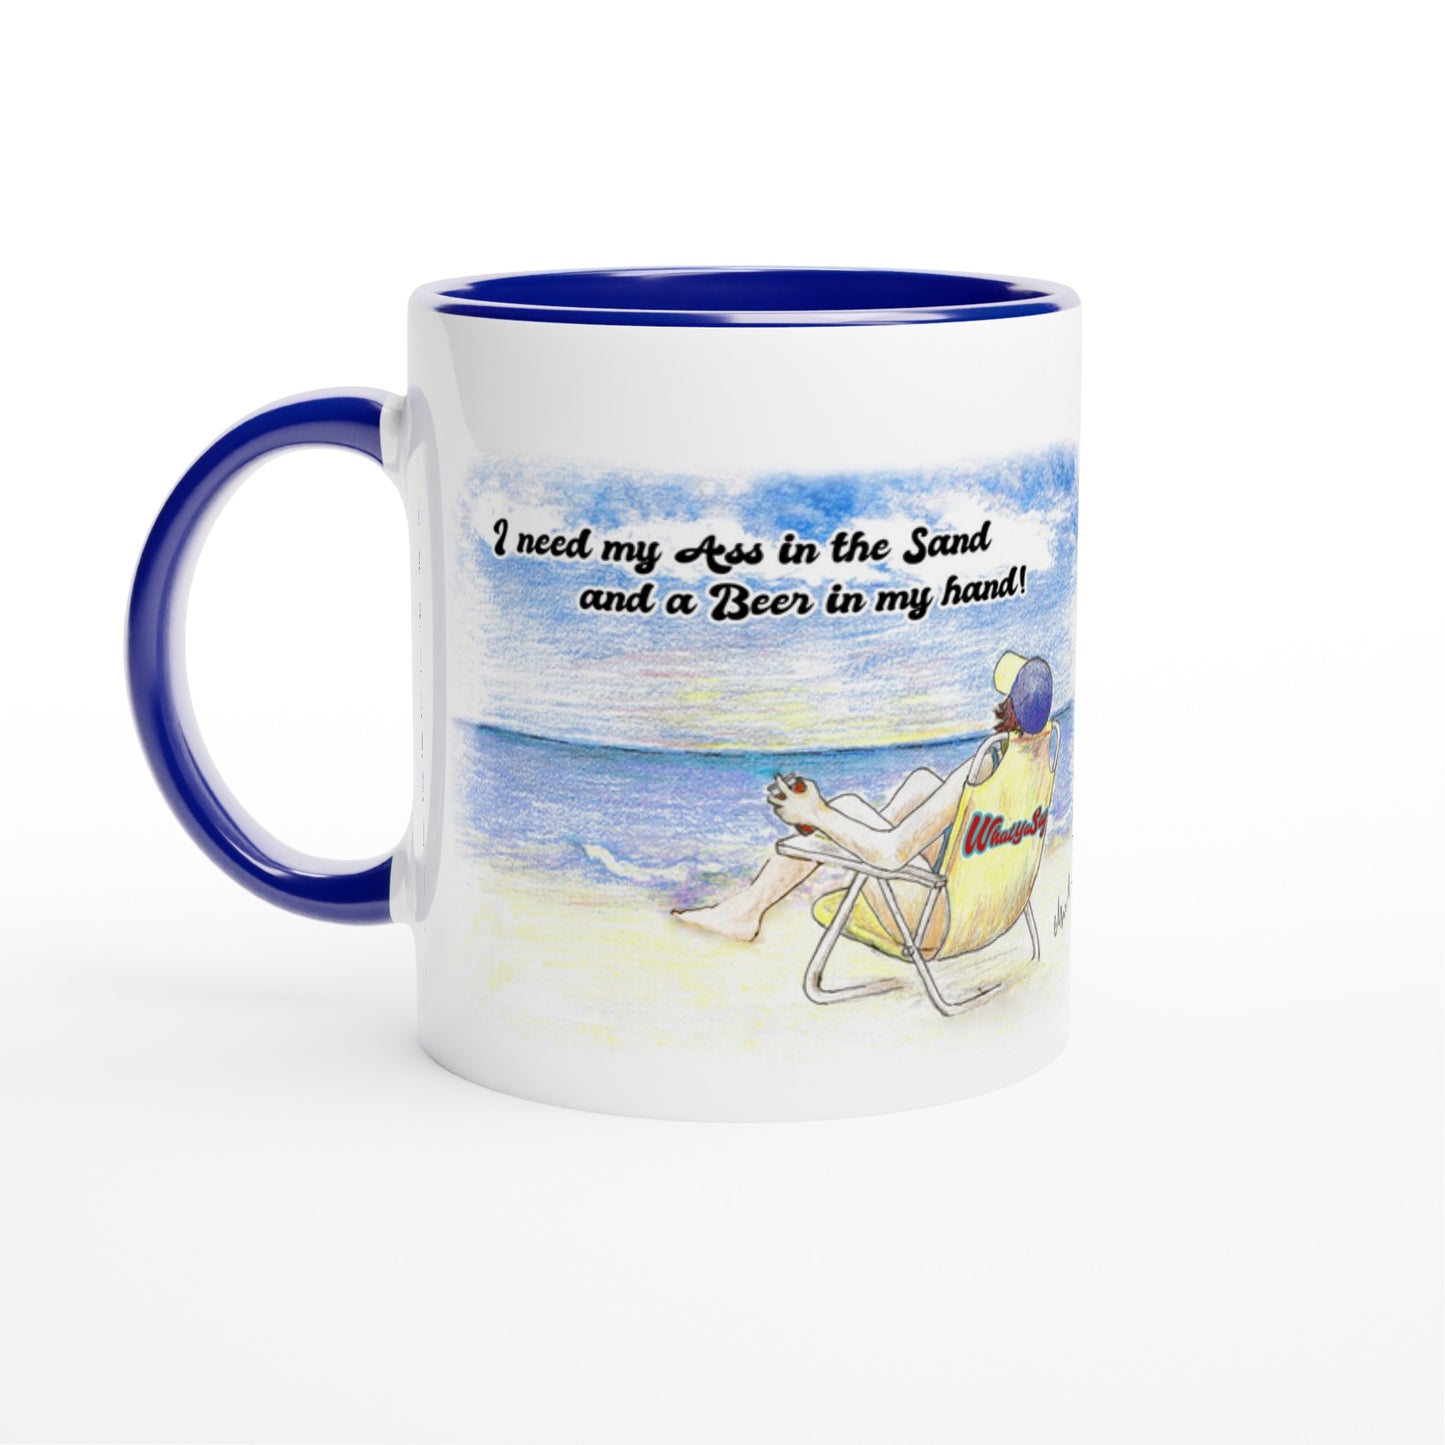 White ceramic 11oz mug with blue handle and orignial motto I need my Ass in the Sand and a Beer in my hand front side and WhatYa Say logo on back dishwasher and microwave safe ceramic coffee mug from WhatYa Say Apparel front view.